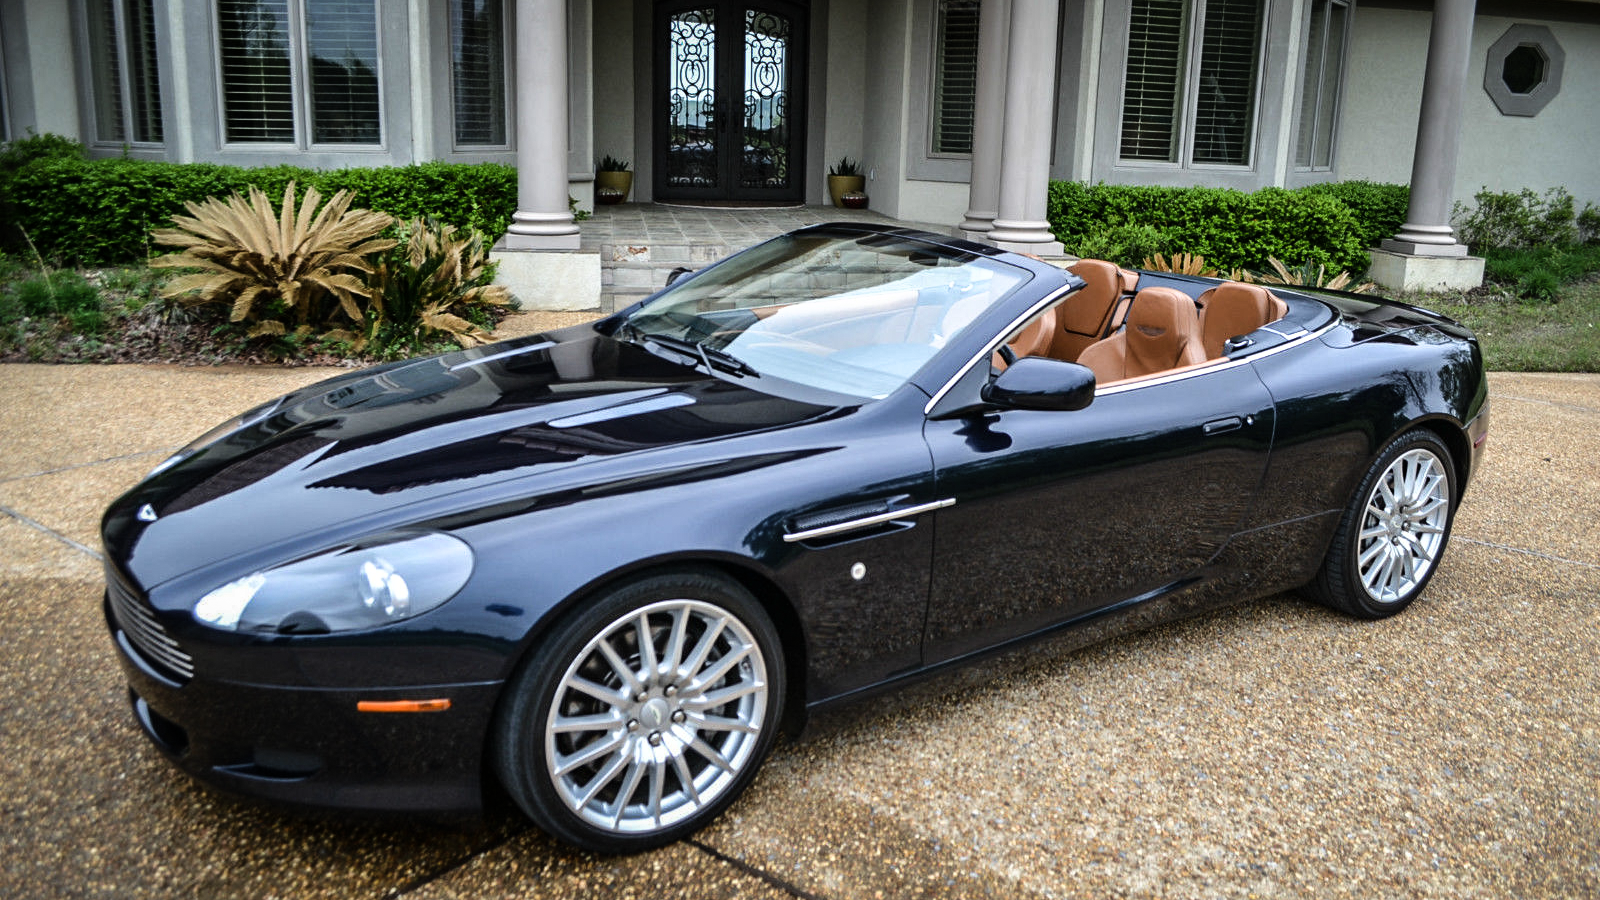 Why Buy A Used M3 When You Can Get A Sexy V12 Aston Martin Convertible